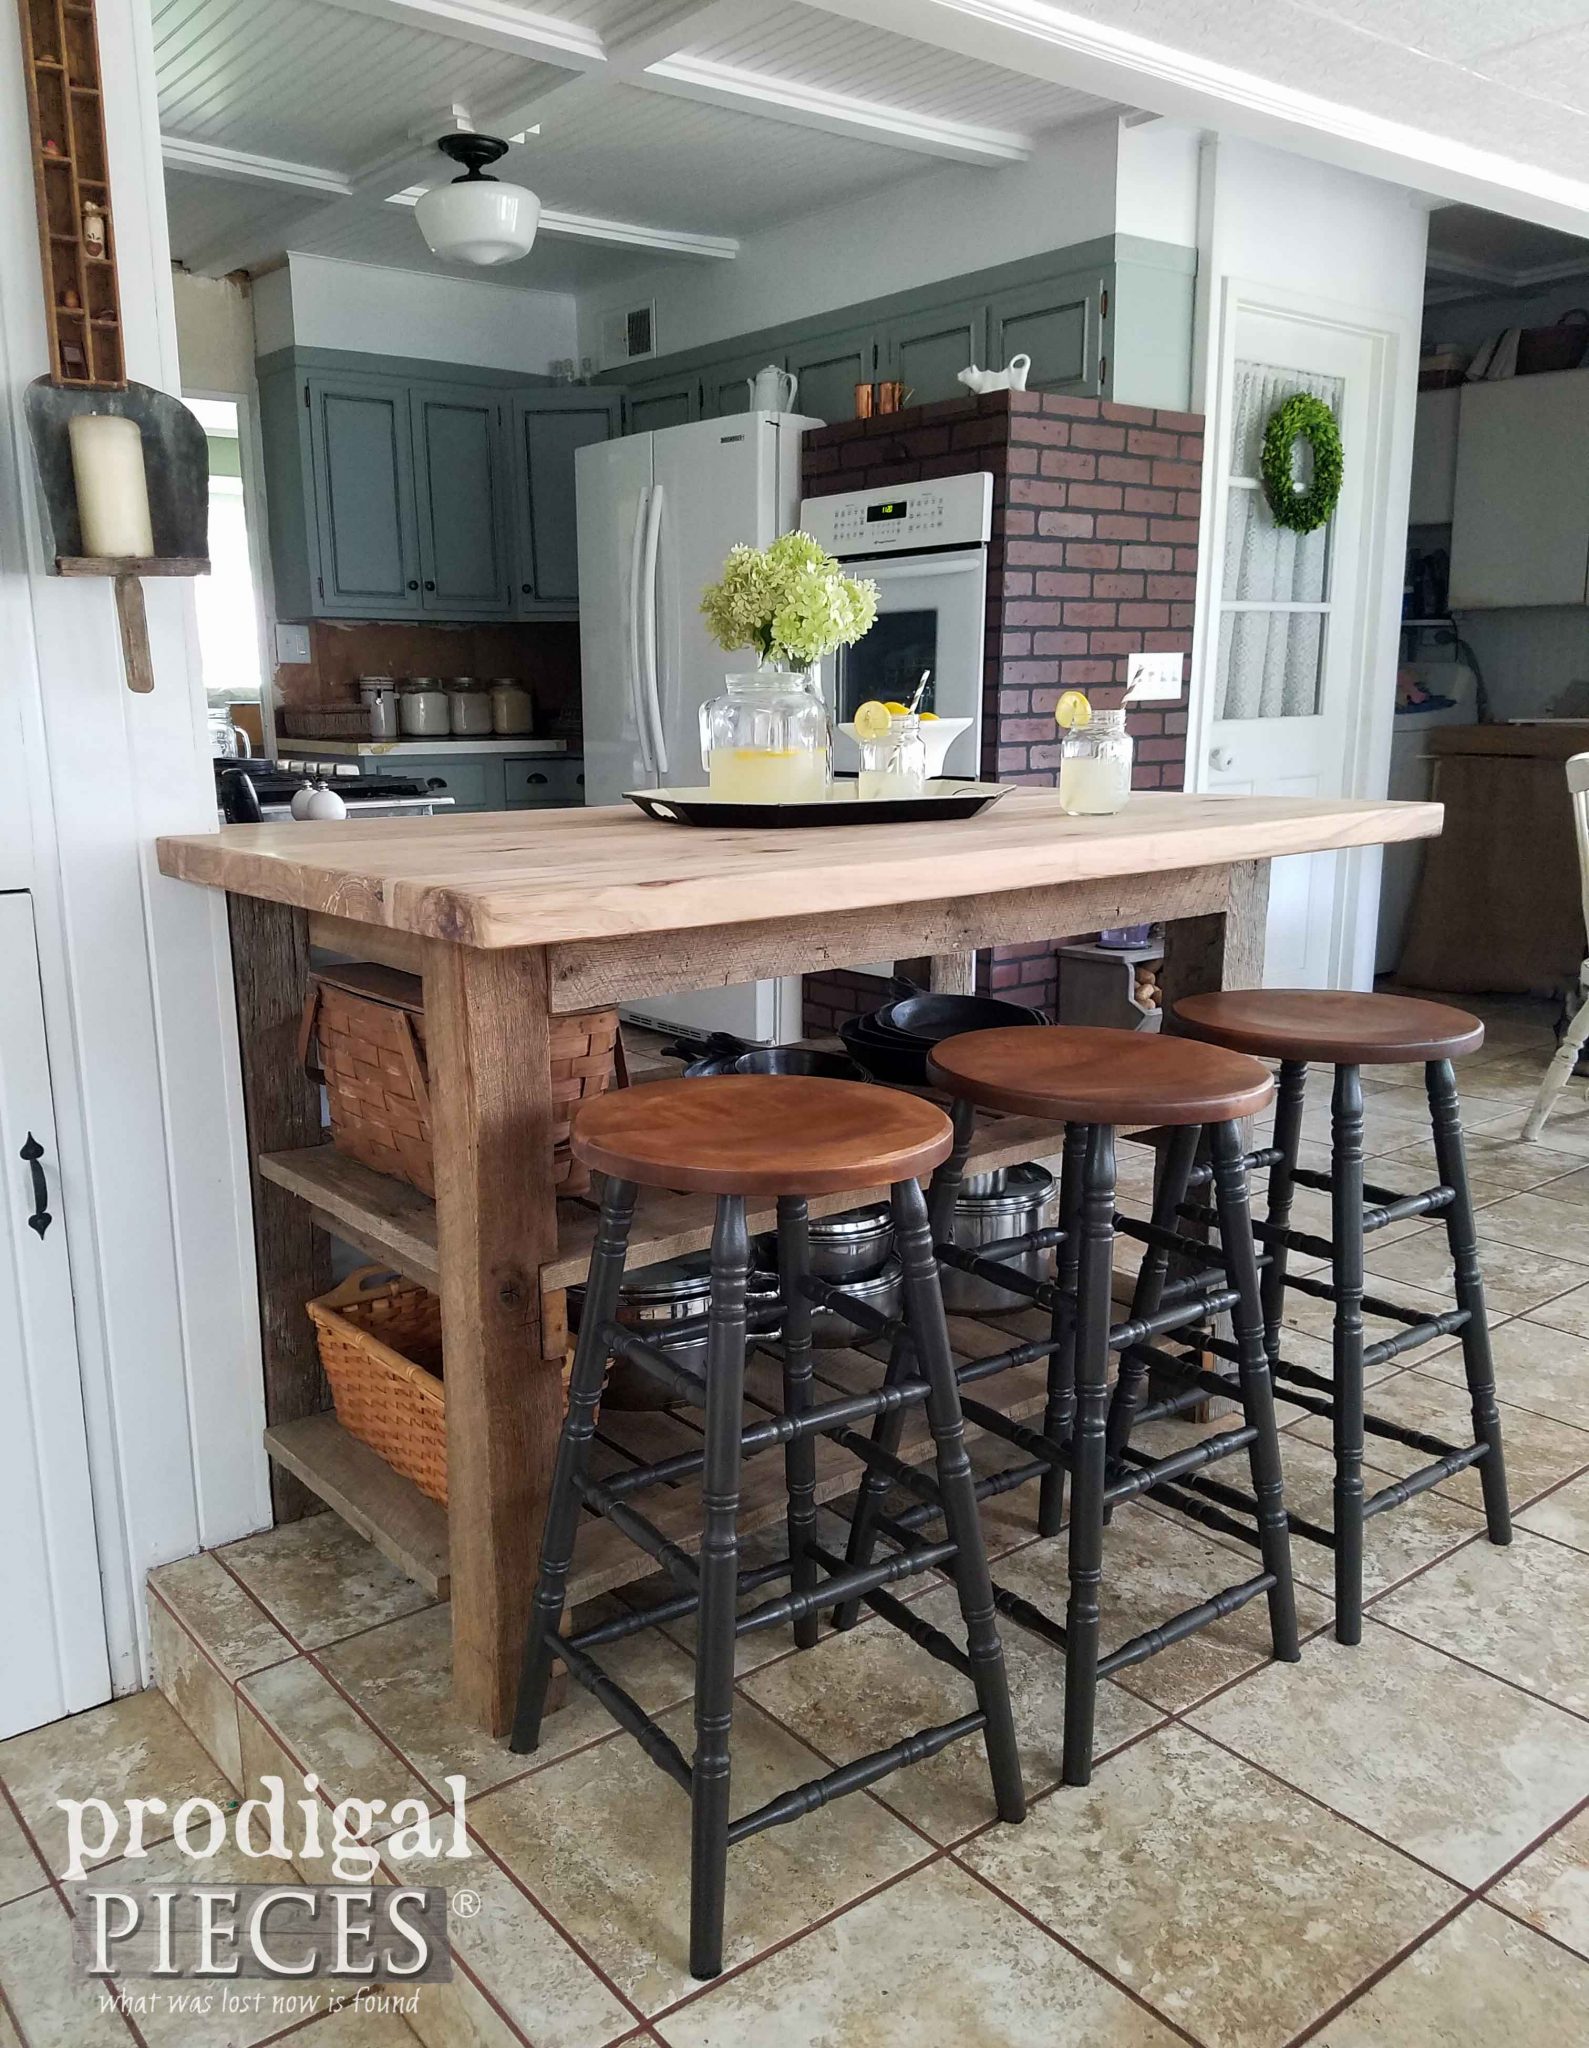 Farmhouse Style Kitchen Update with Bar Stools by Prodigal Pieces | prodigalpieces.com